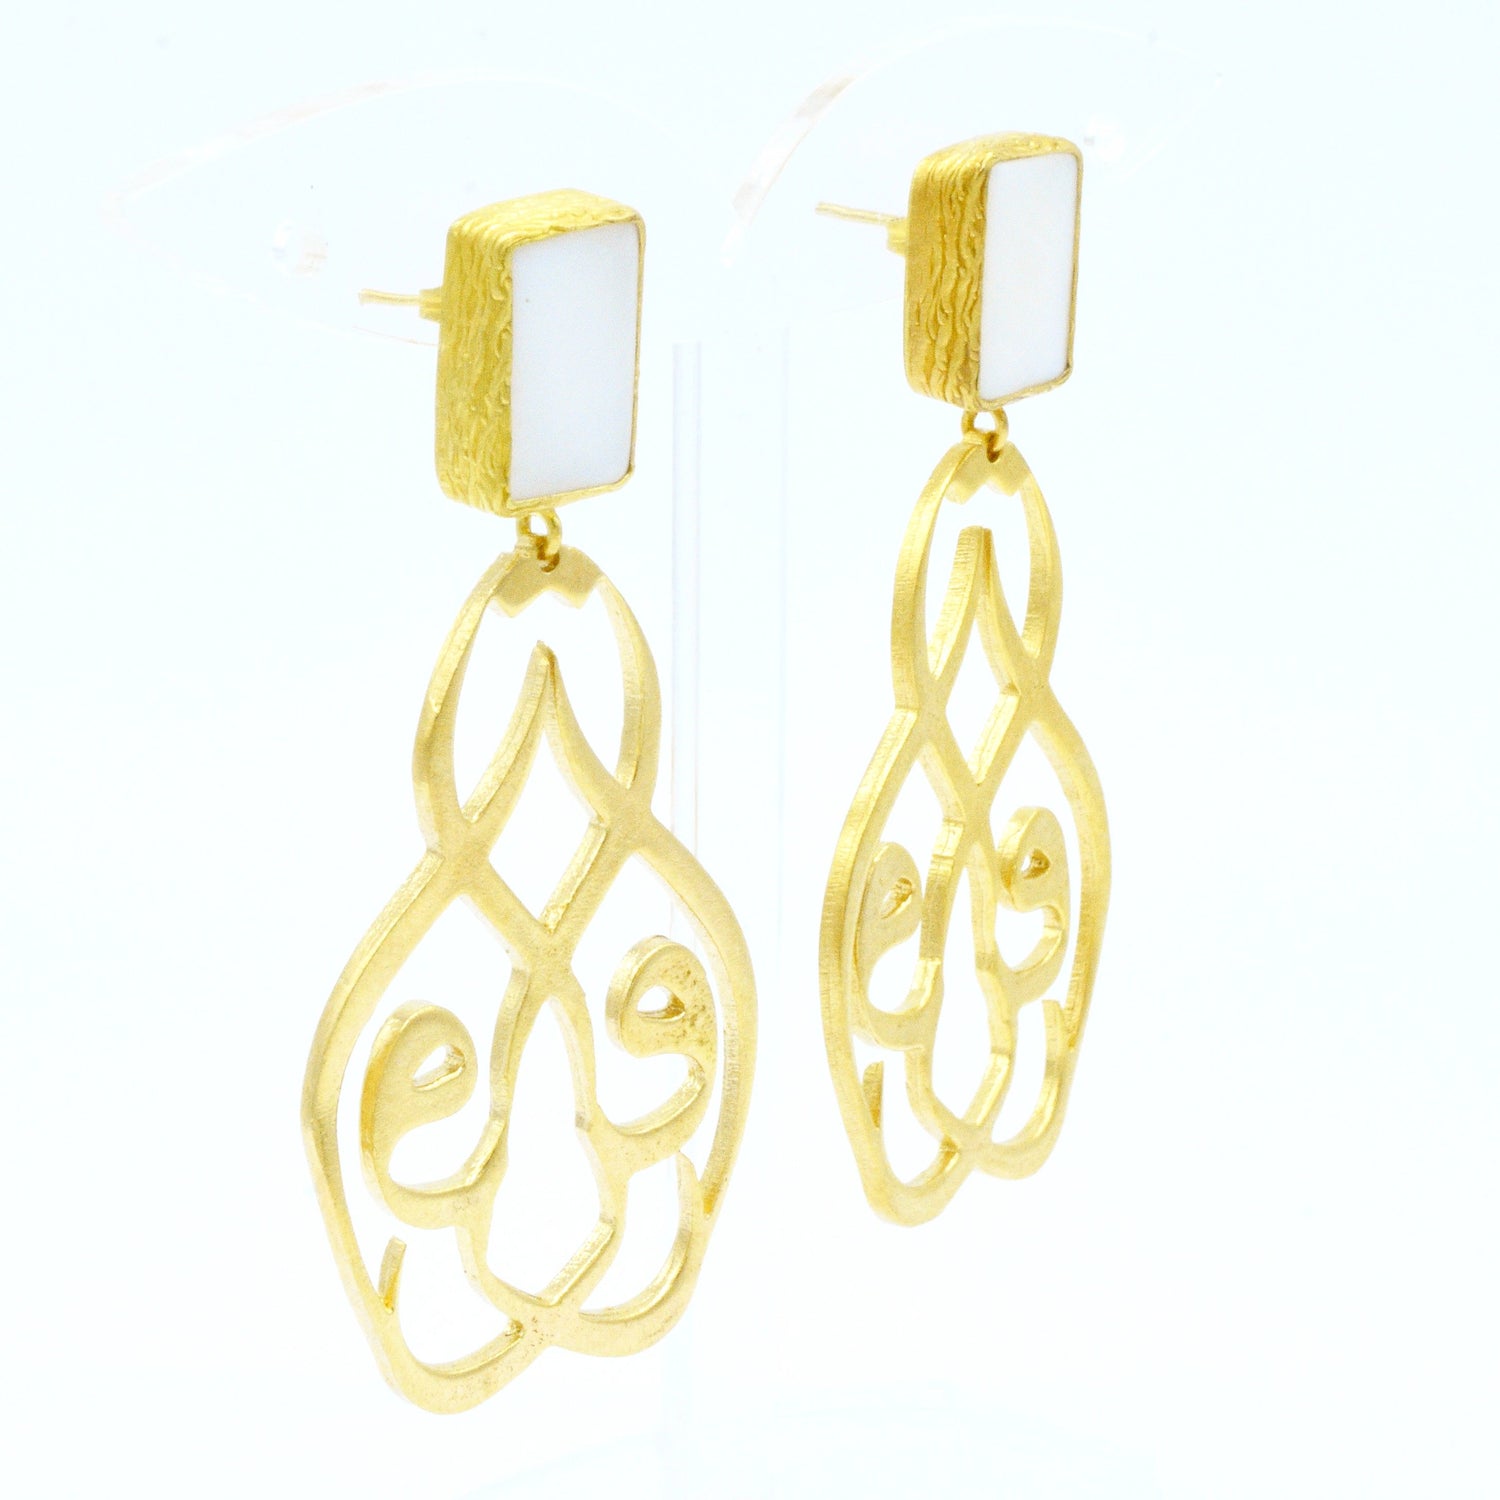 Aylas Mother Pearl Arabic earrings - 21ct Gold plated semi precious gemstone - Handmade in Ottoman Style by Artisan